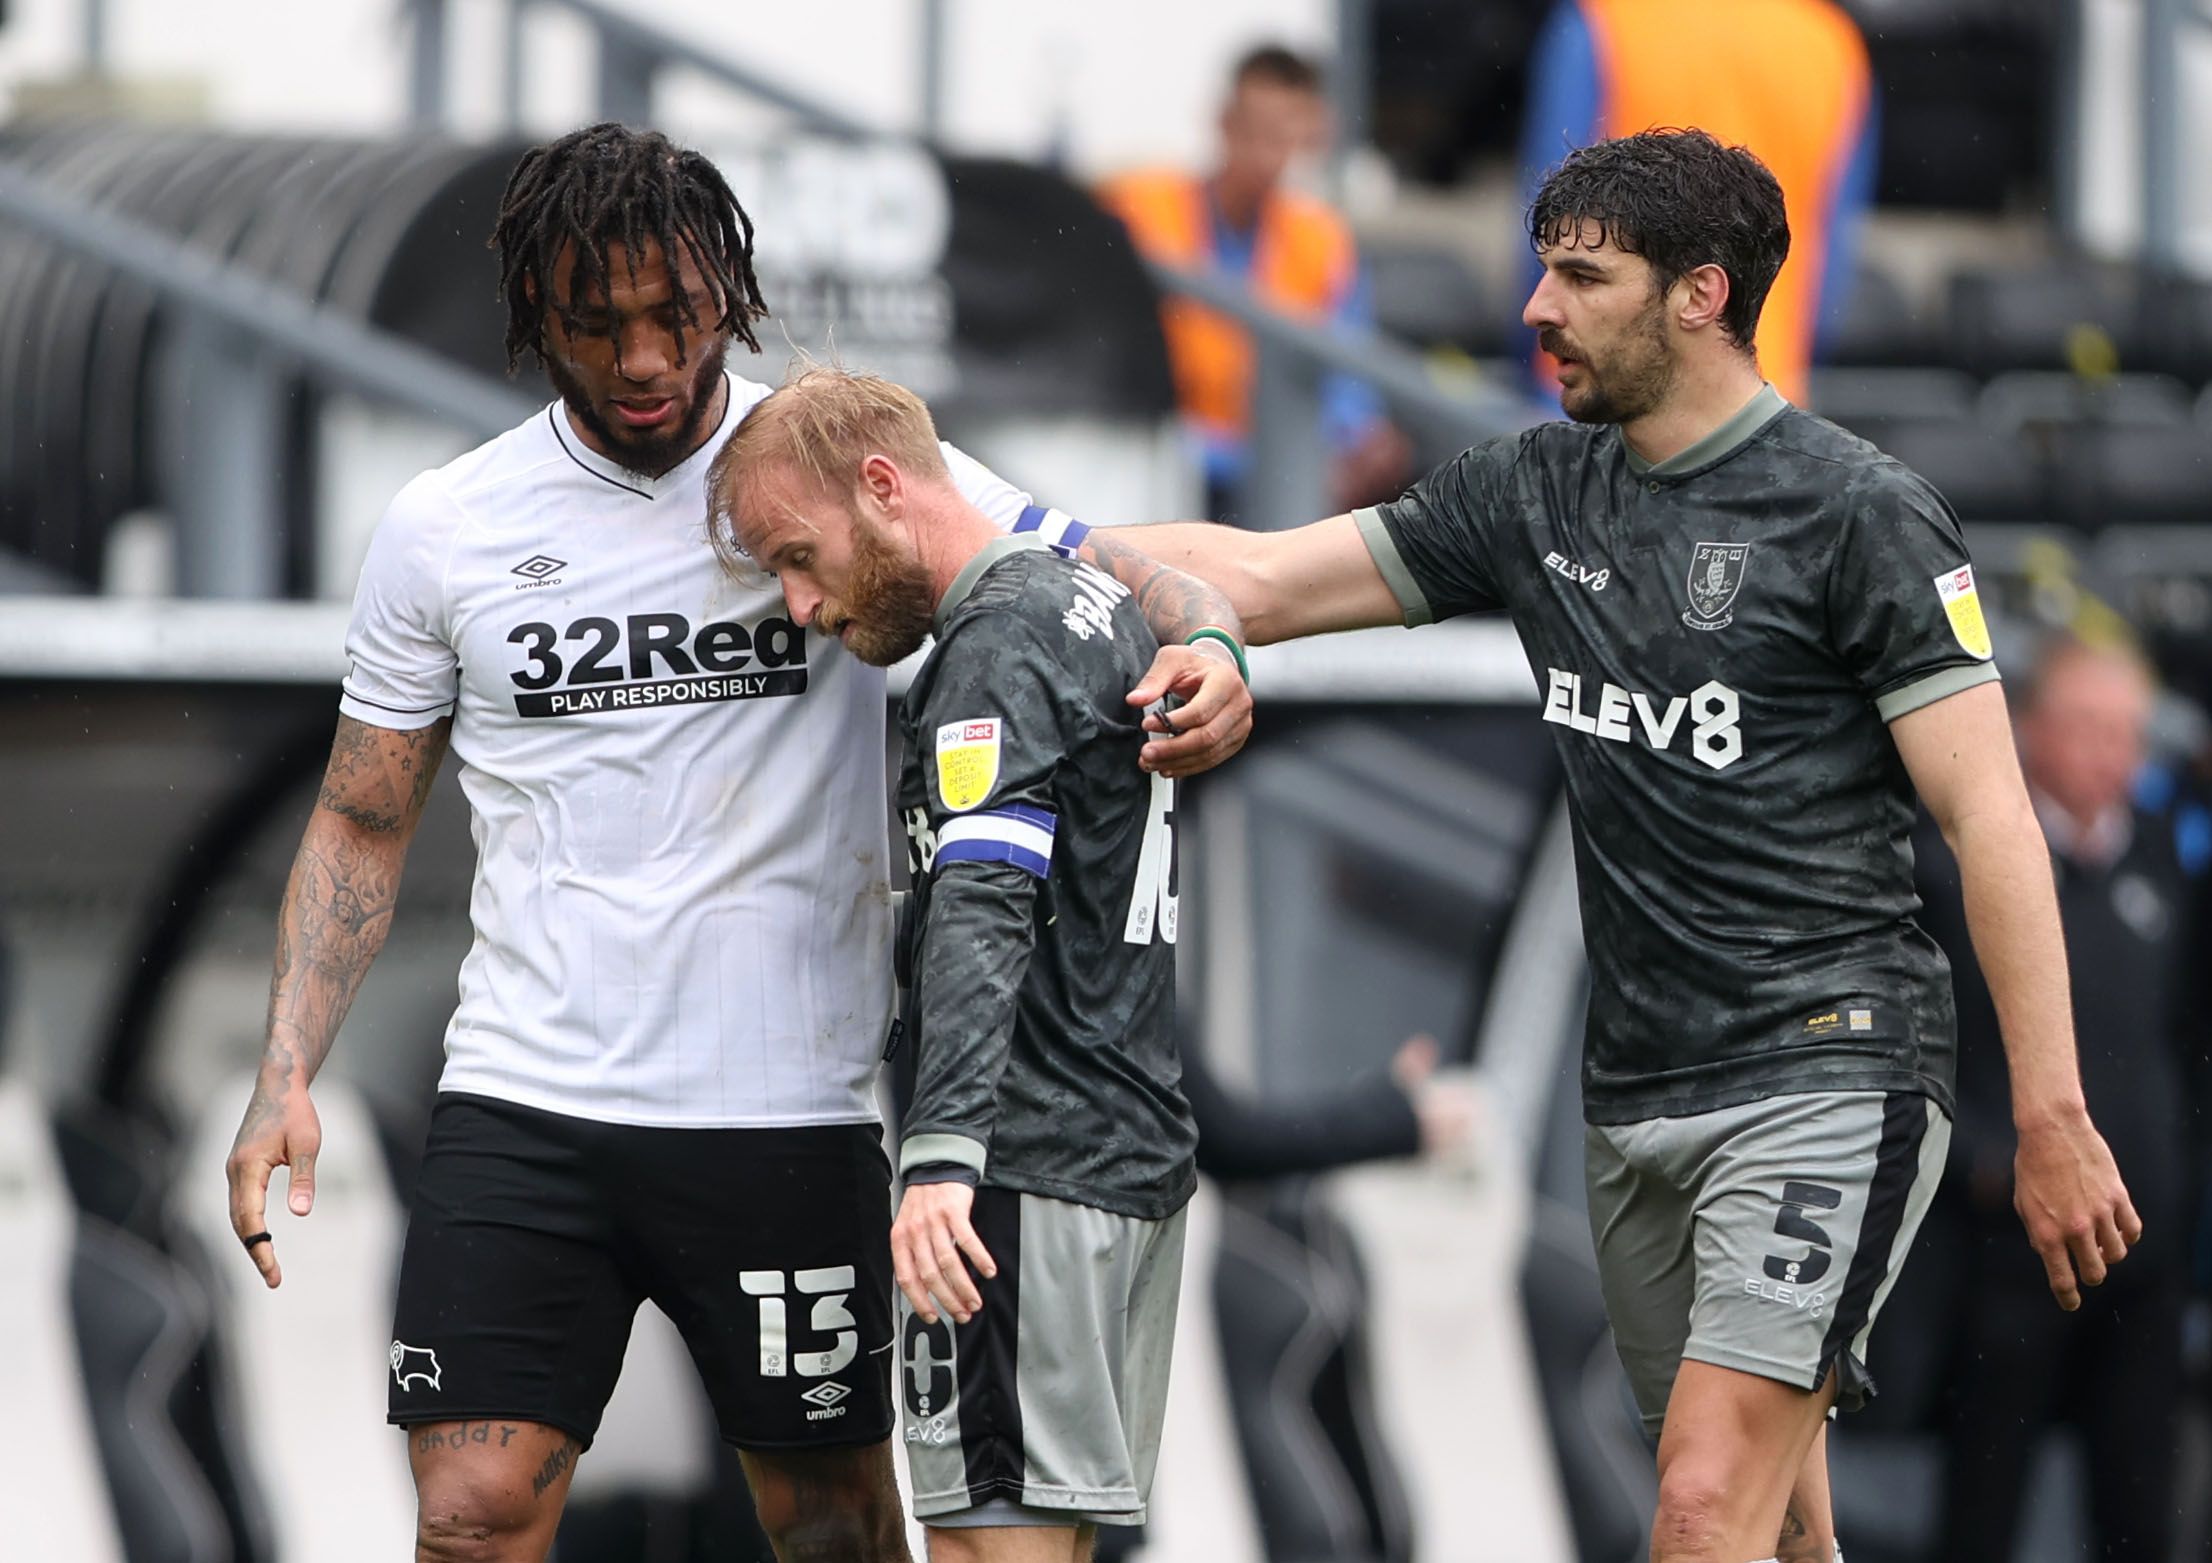 Soccer Football - Championship - Derby County v Sheffield Wednesday - Pride Park, Derby, Britain - May 8, 2021 Derby County's Colin Kazim-Richards consoles Sheffield Wednesday's Barry Bannan after the match Action Images/Molly Darlington EDITORIAL USE ONLY. No use with unauthorized audio, video, data, fixture lists, club/league logos or 'live' services. Online in-match use limited to 75 images, no video emulation. No use in betting, games or single club /league/player publications.  Please conta